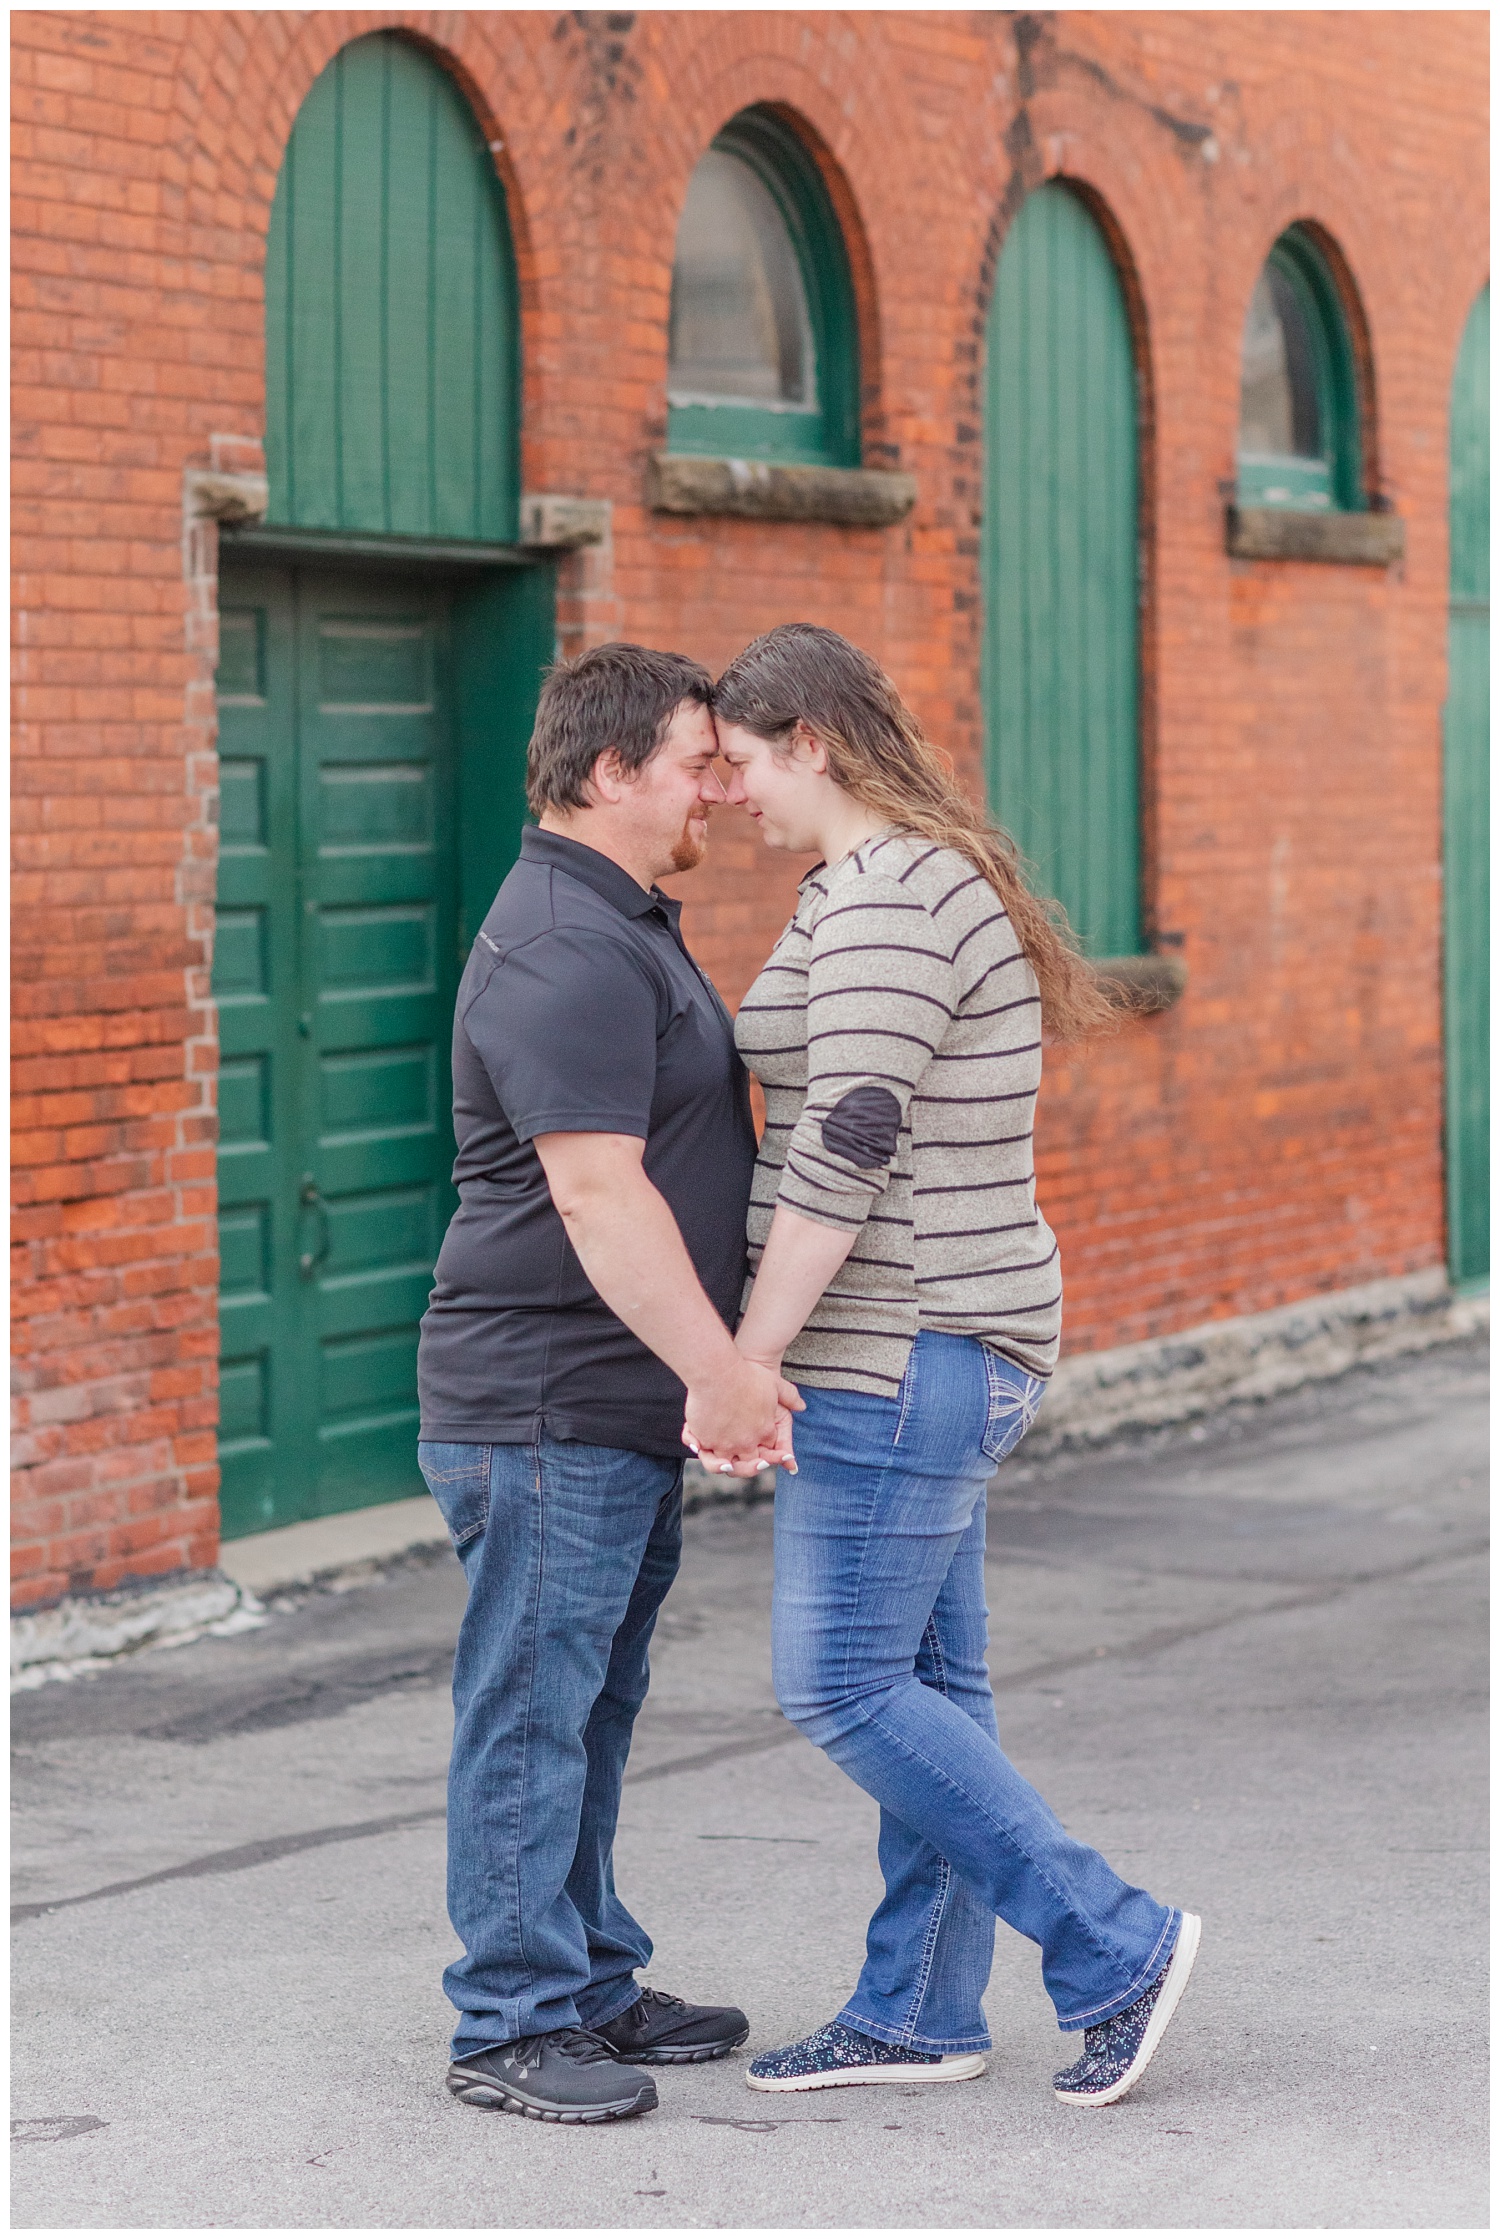 couple posing in front of a red brick building with green doors